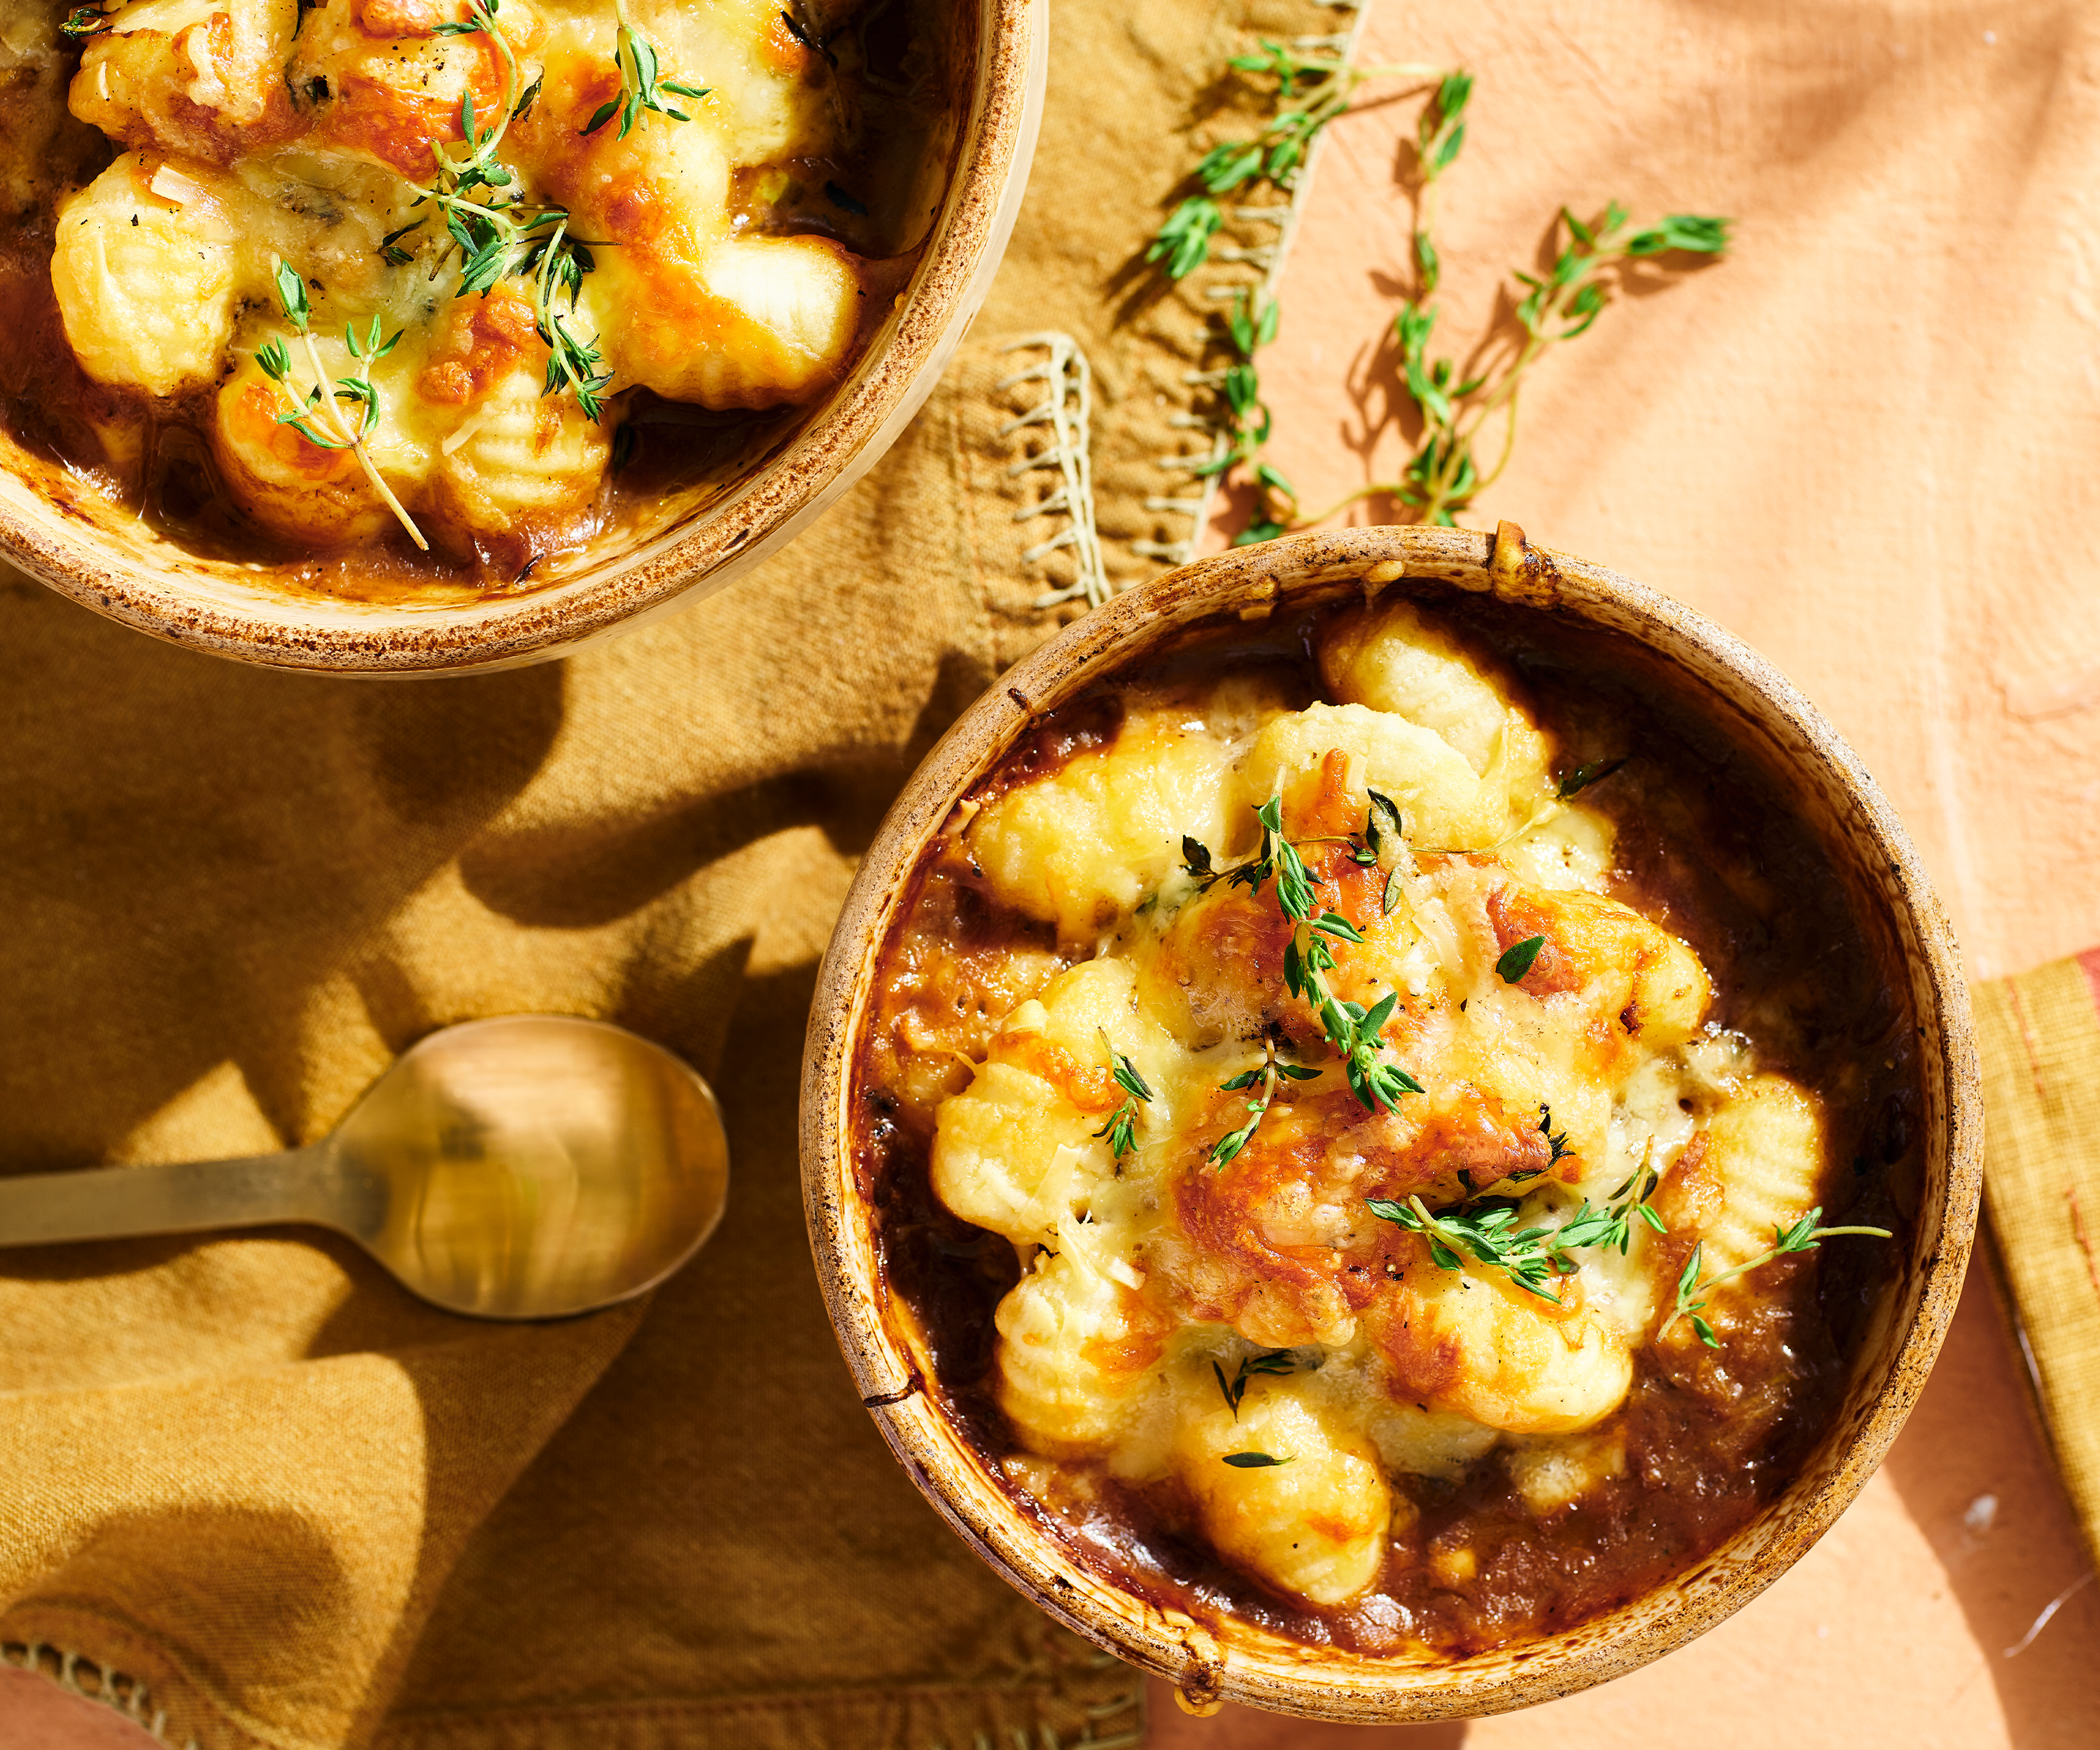 Bowls of cheesy gnocchi French onion soup